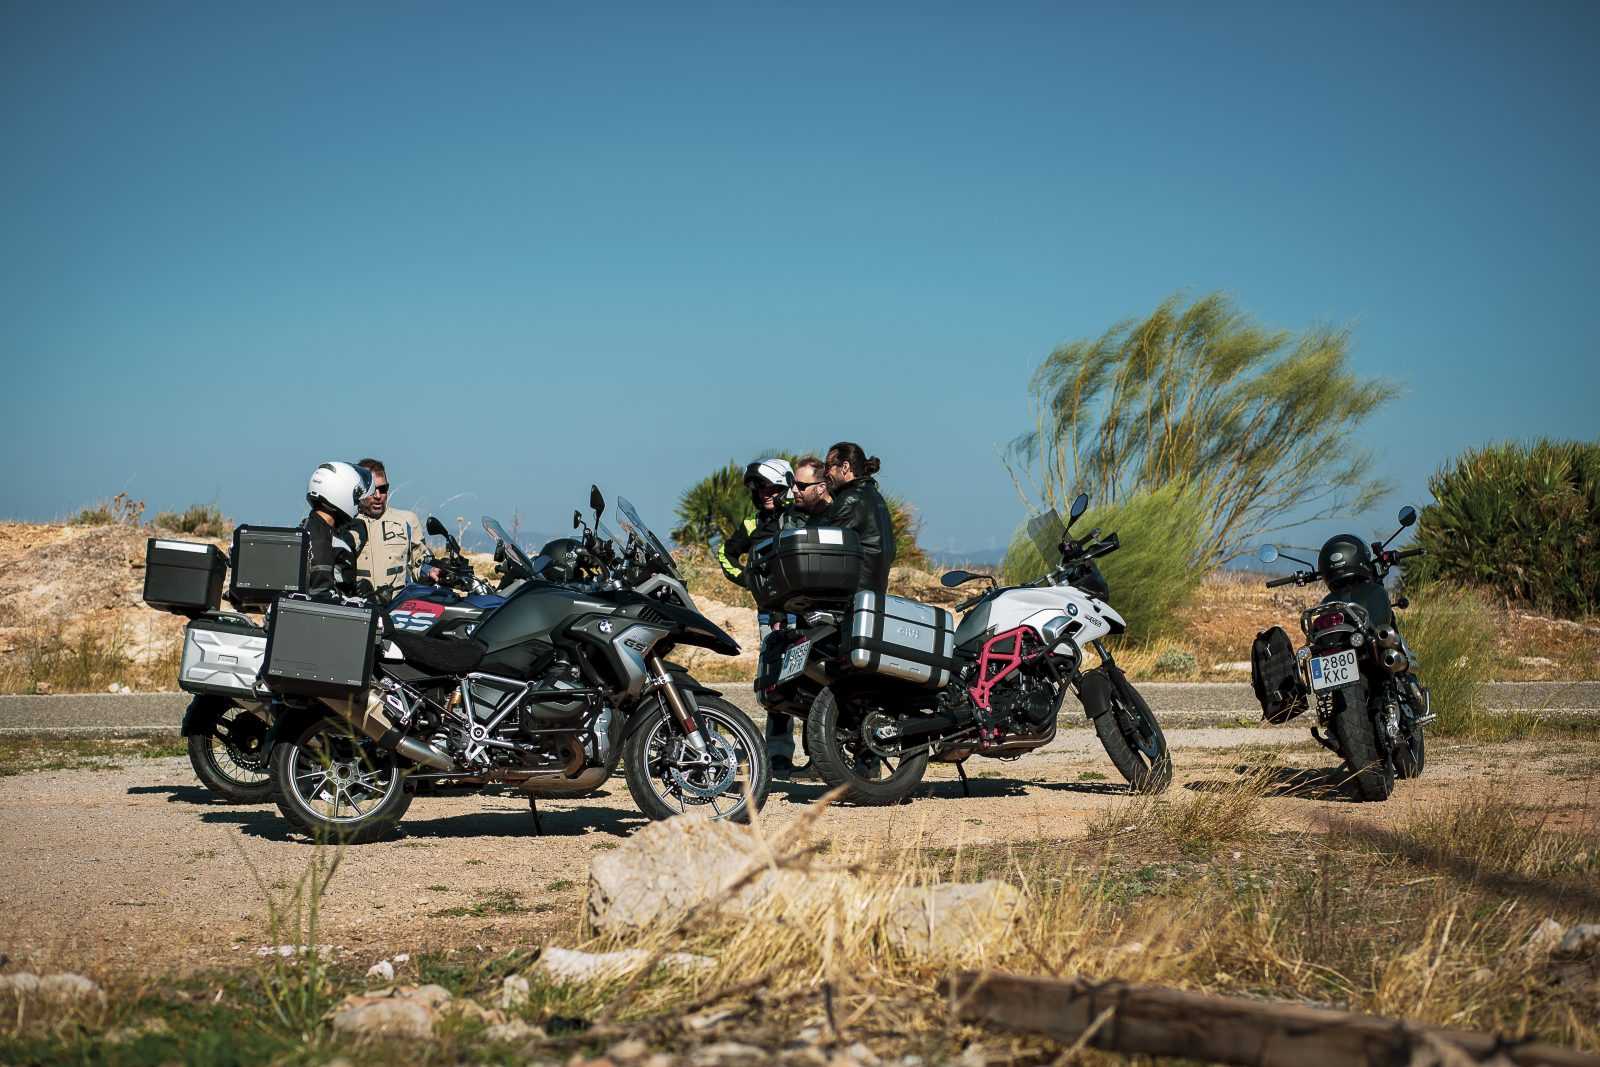 southern spain motorcycle tours